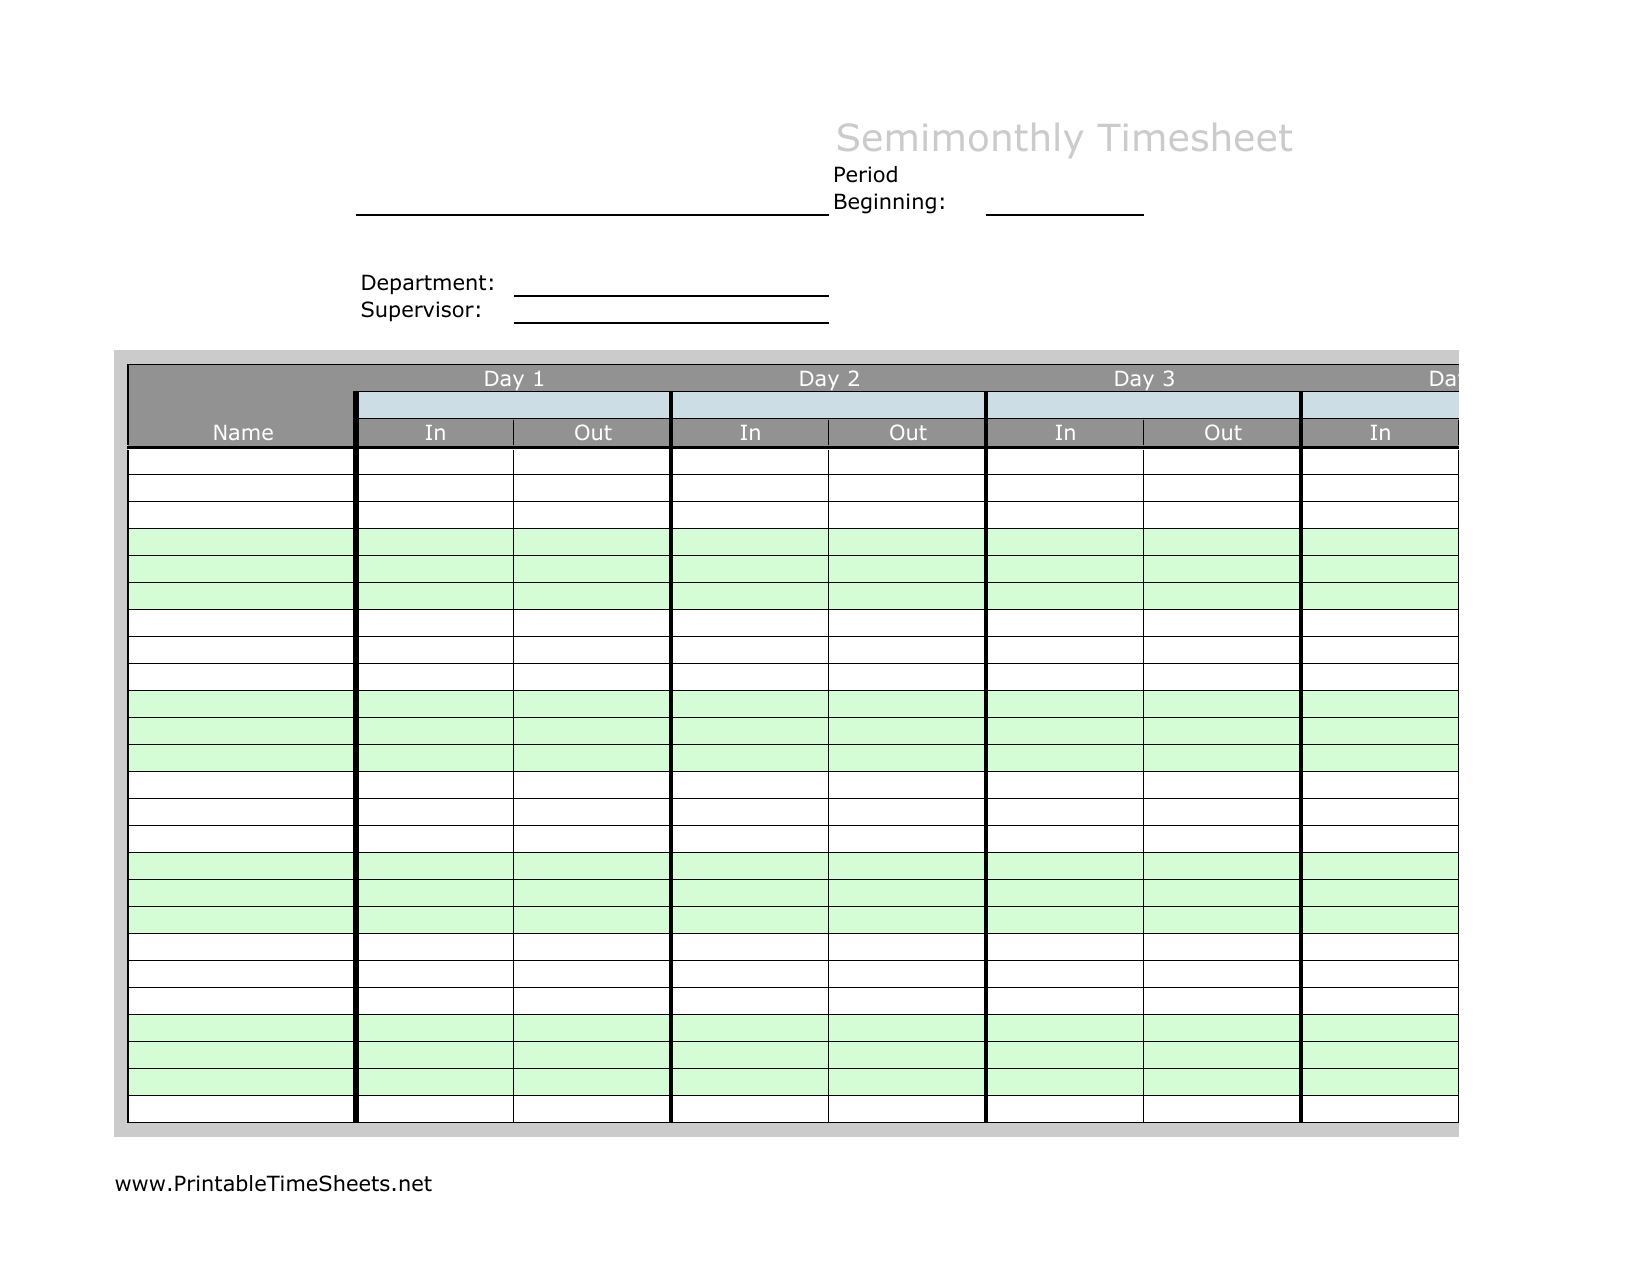 download-semi-month-timesheet-template-excel-pdf-rtf-word